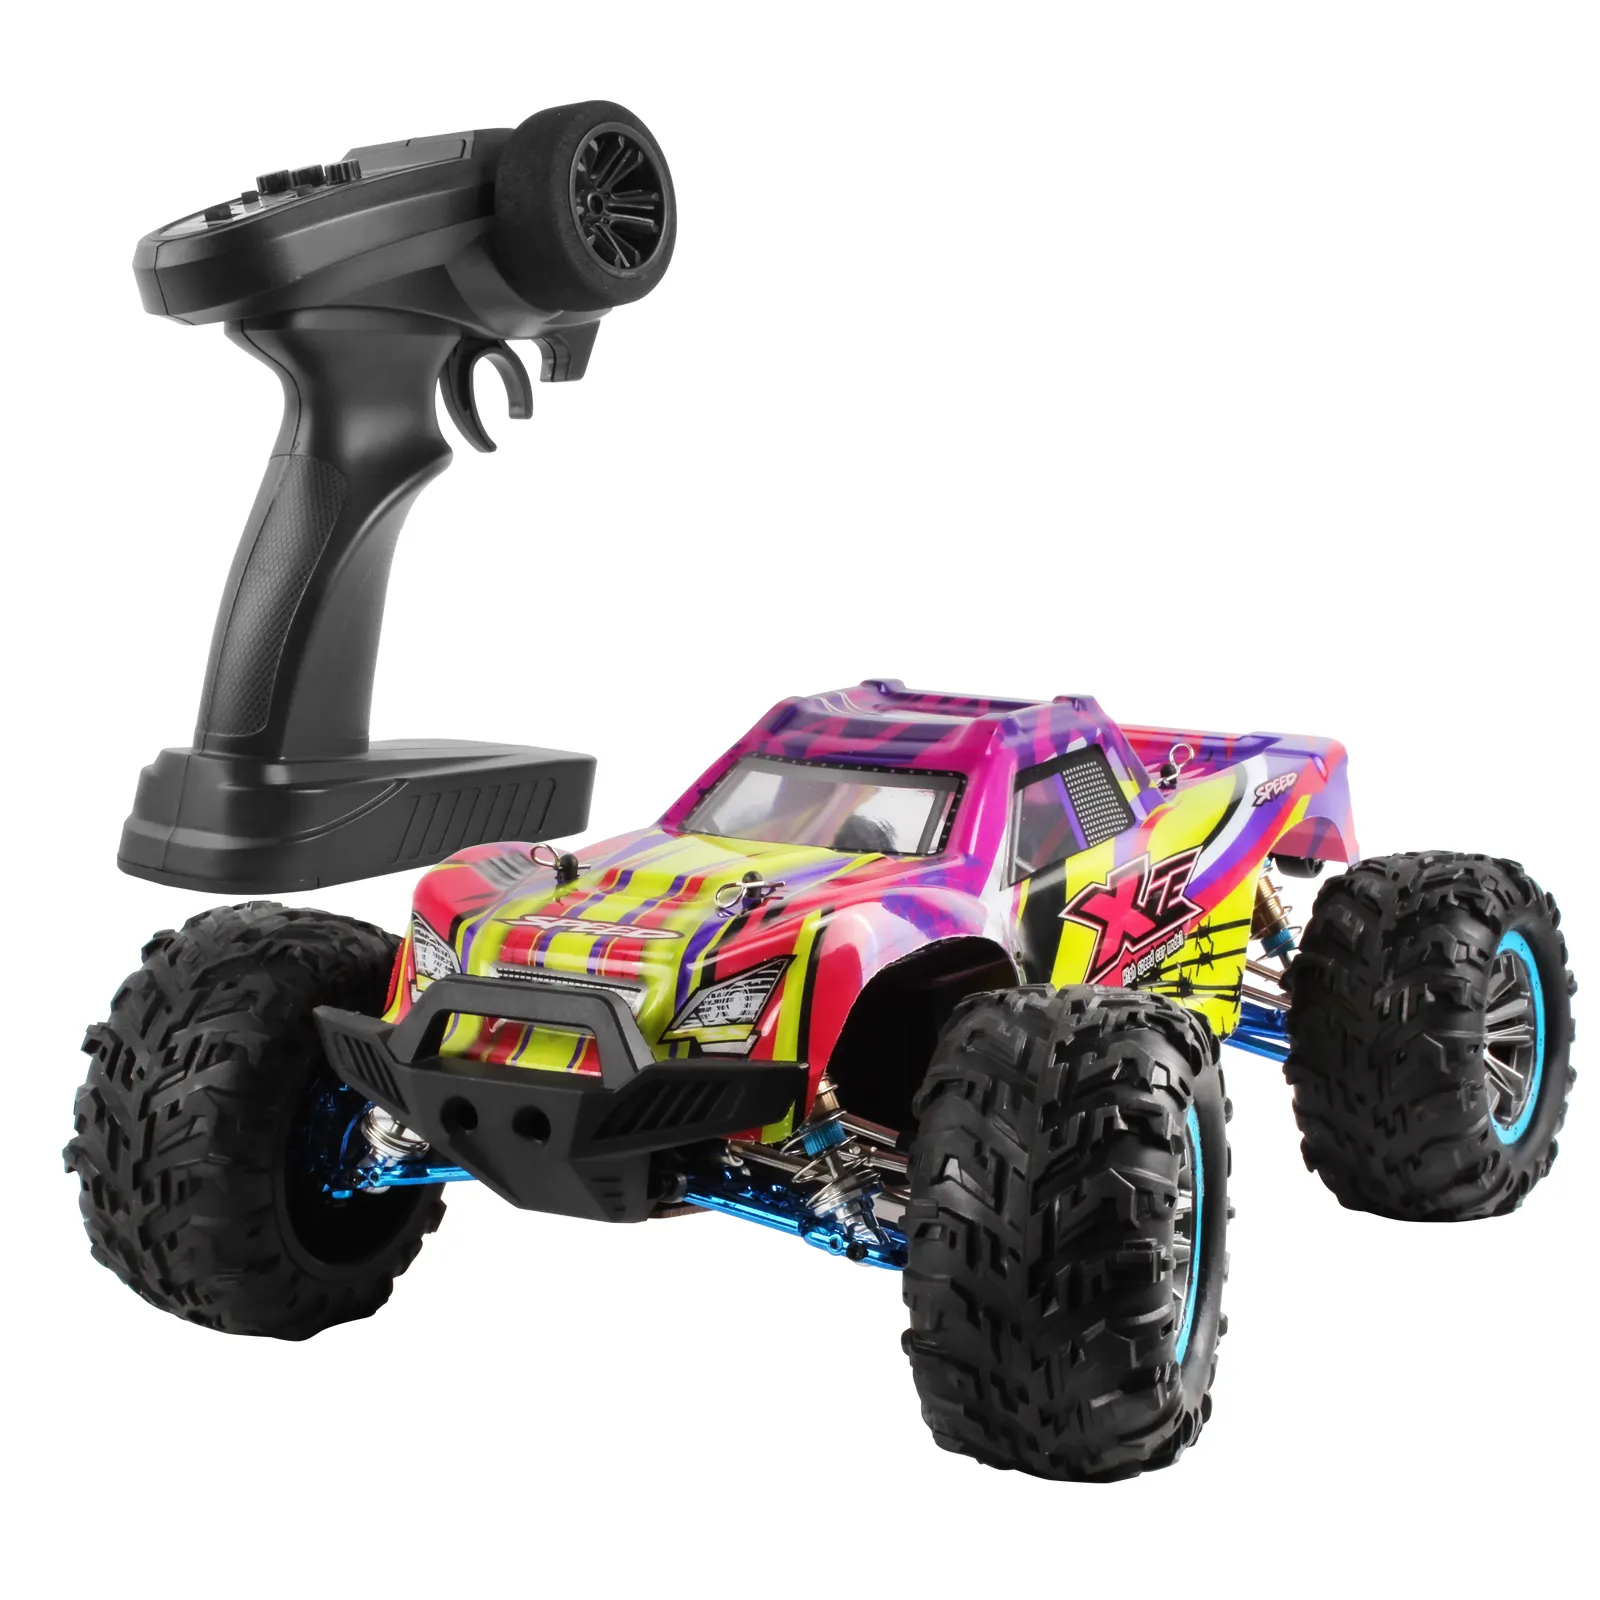 high speed toy vehicle fast 100 mph 4x4 hobby grade 2022 1/10 for adults remote control rc cars truggy